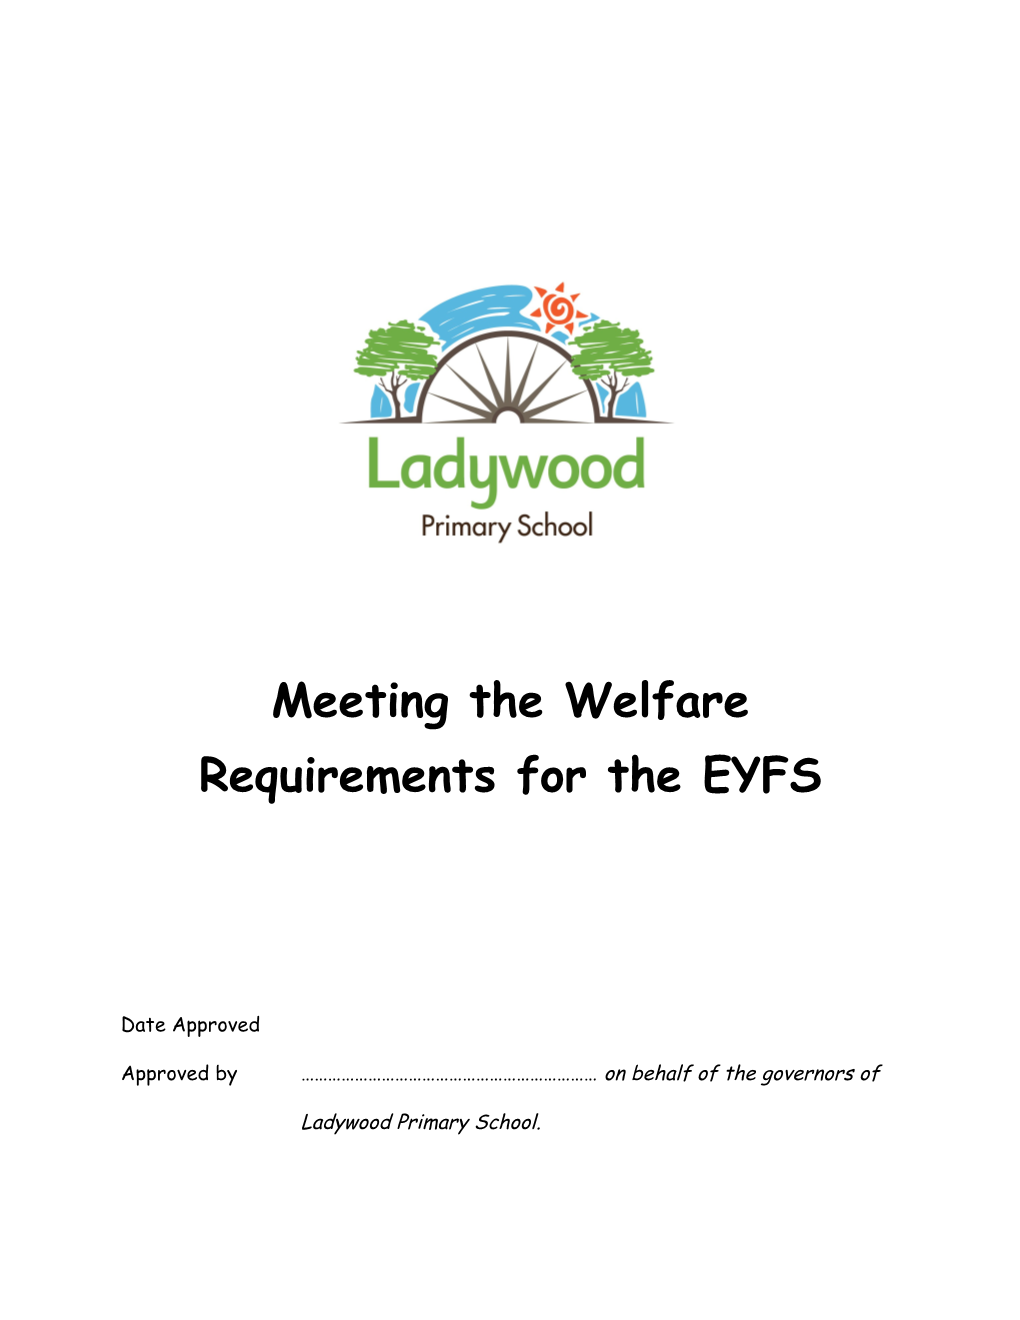 Meeting the Welfare Requirements for the EYFS